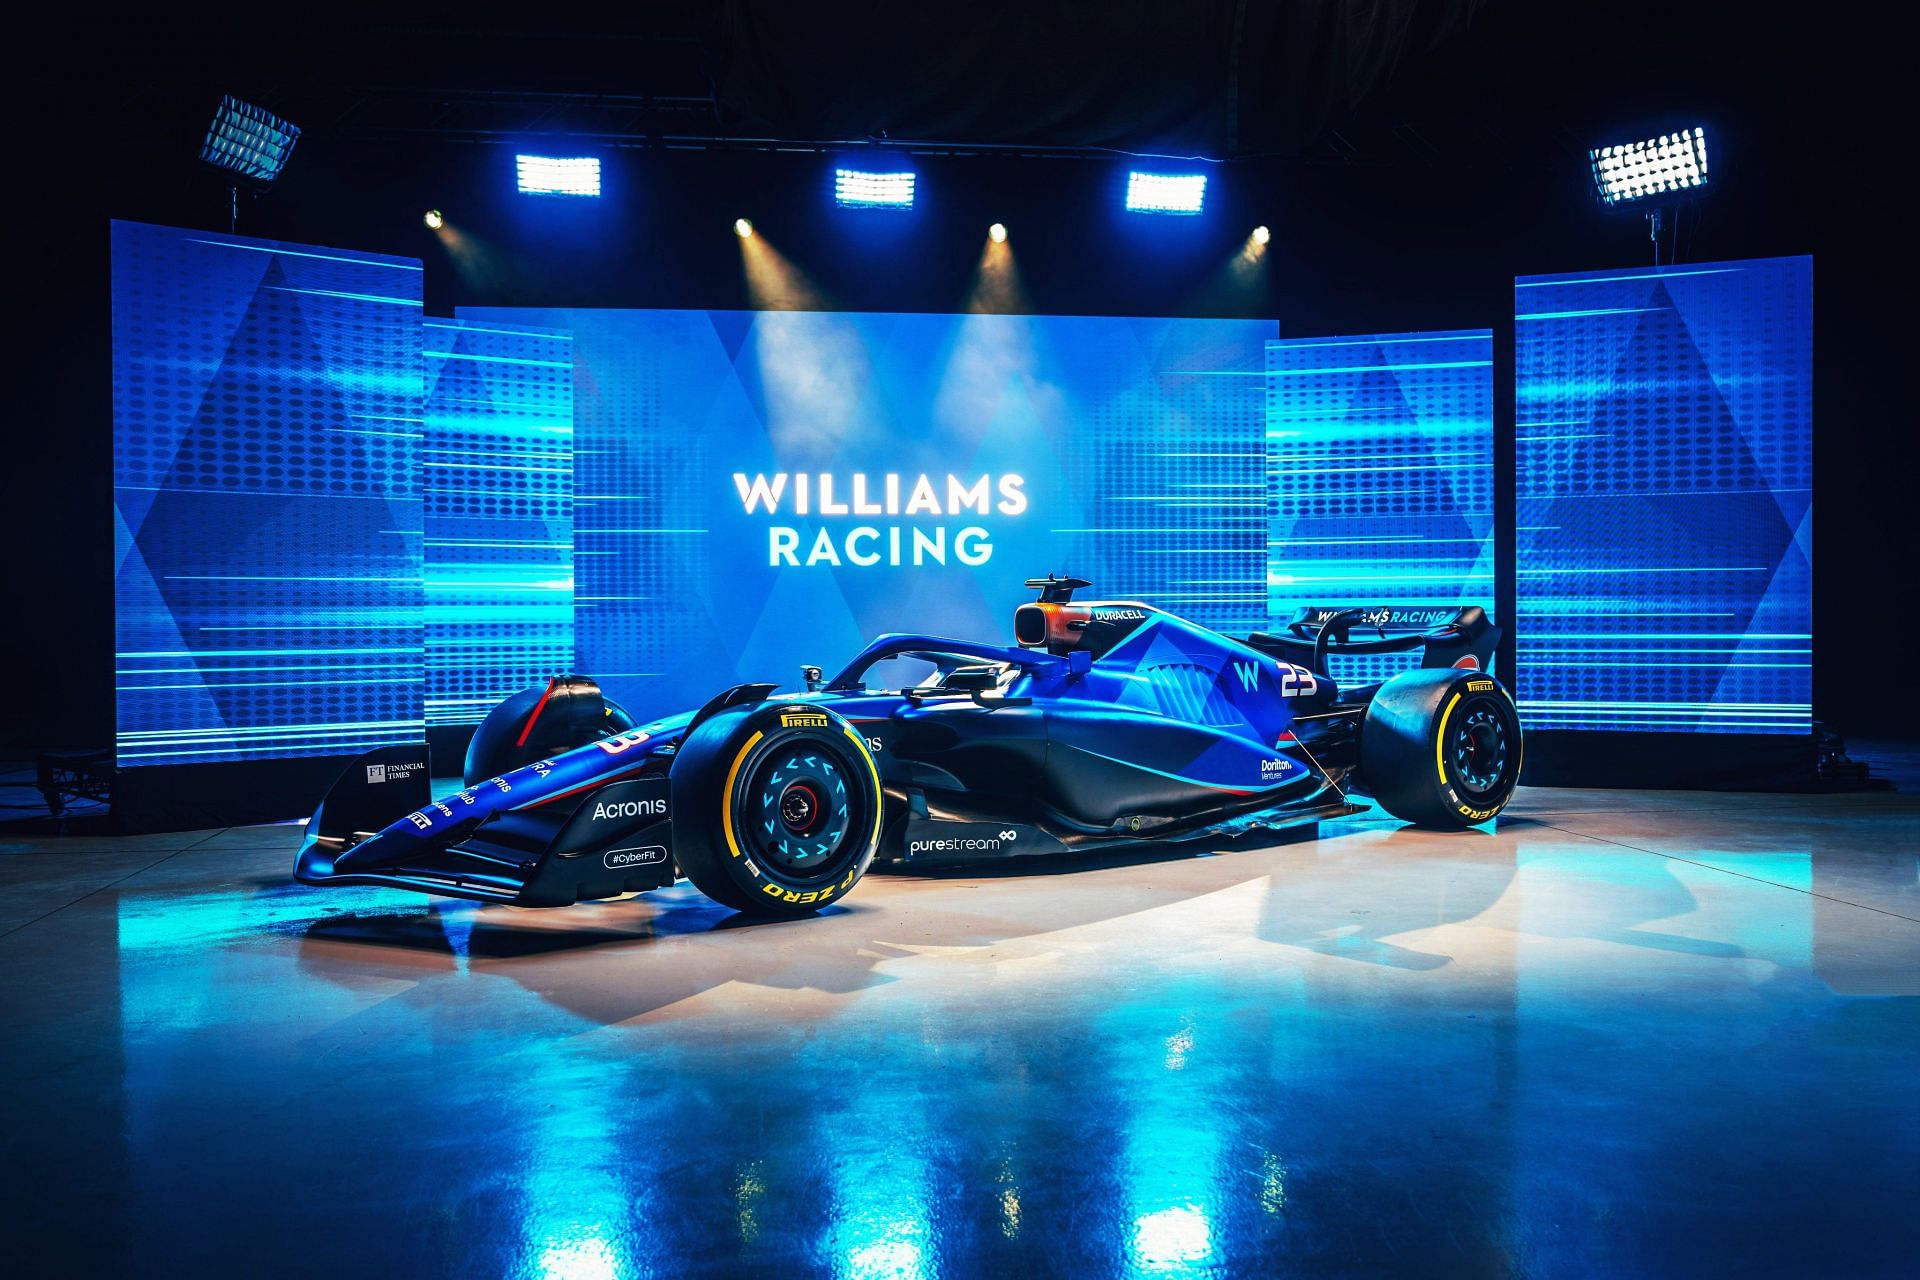 Williams Racing have announced the livery for their 2023 F1 car. [PC: Twitter/F1]